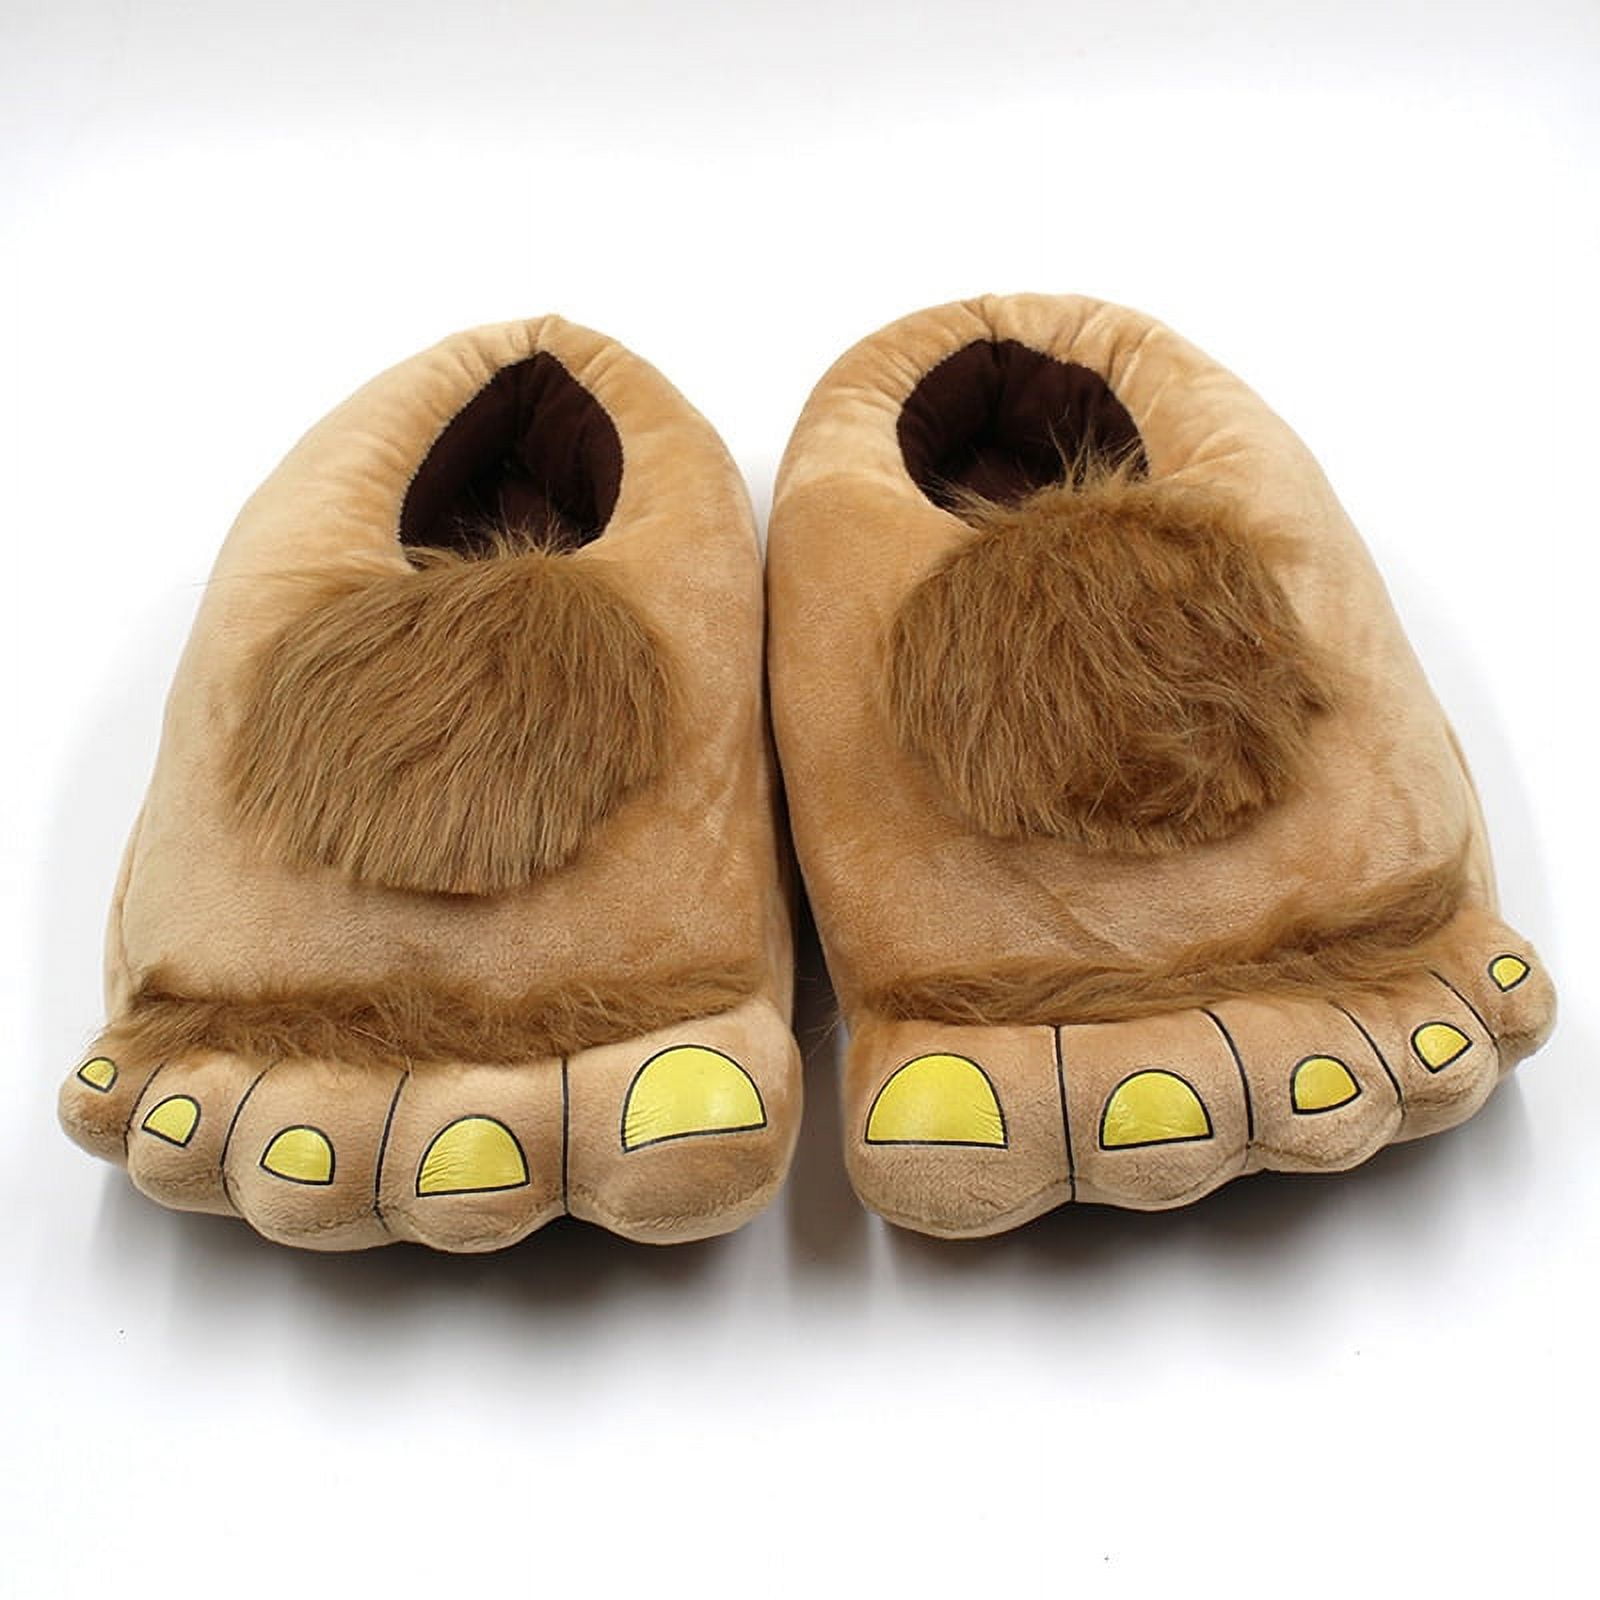 Big Hairy Hobbit Feet Slippers - Funny Outfits